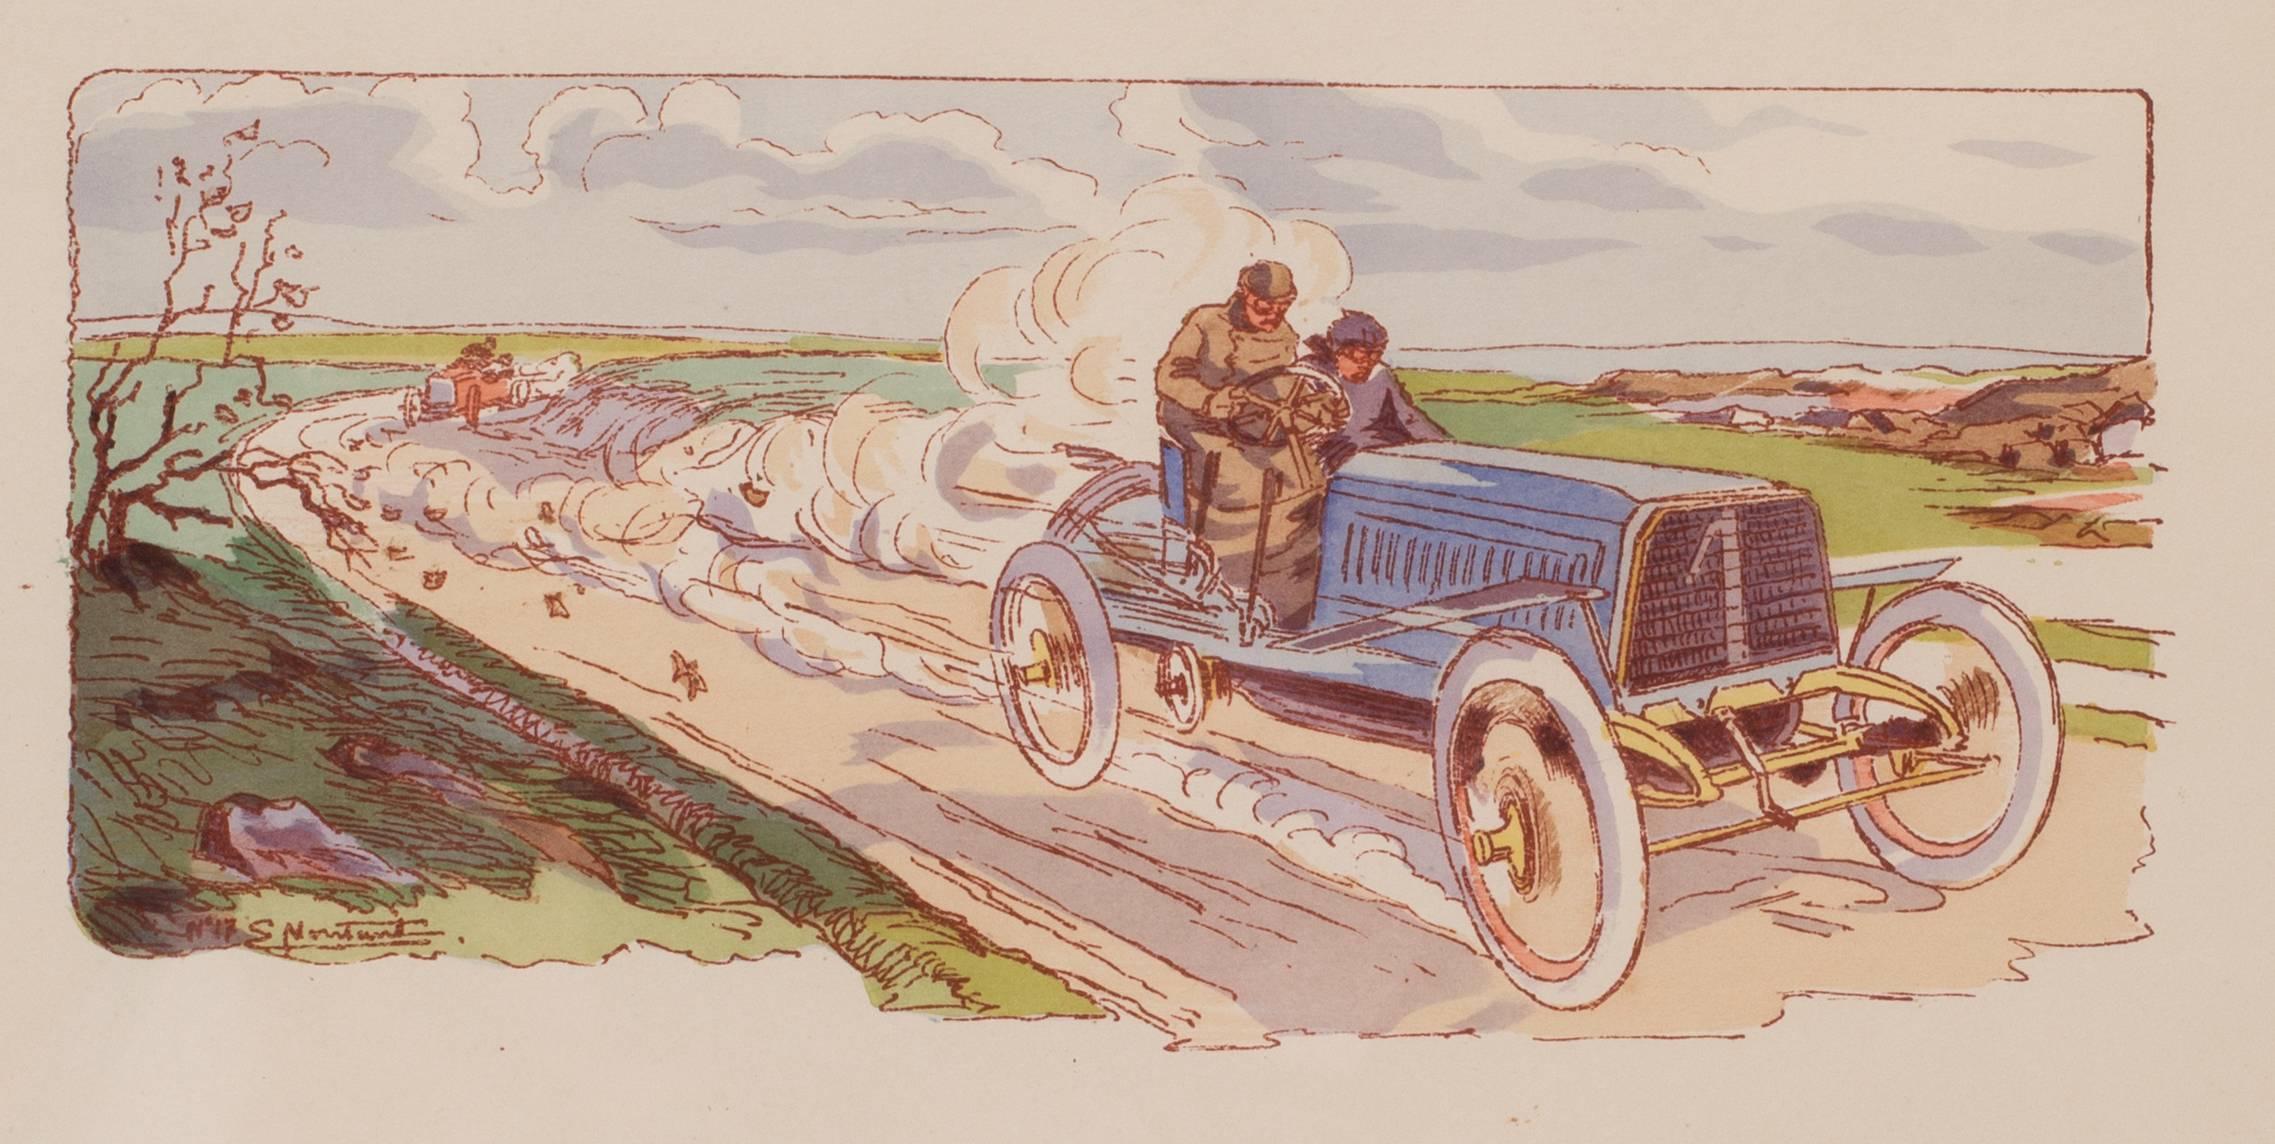 A rare and original turn of the 20th Century lithograph of classic racing cars - Art Nouveau Print by Ernest Montaut